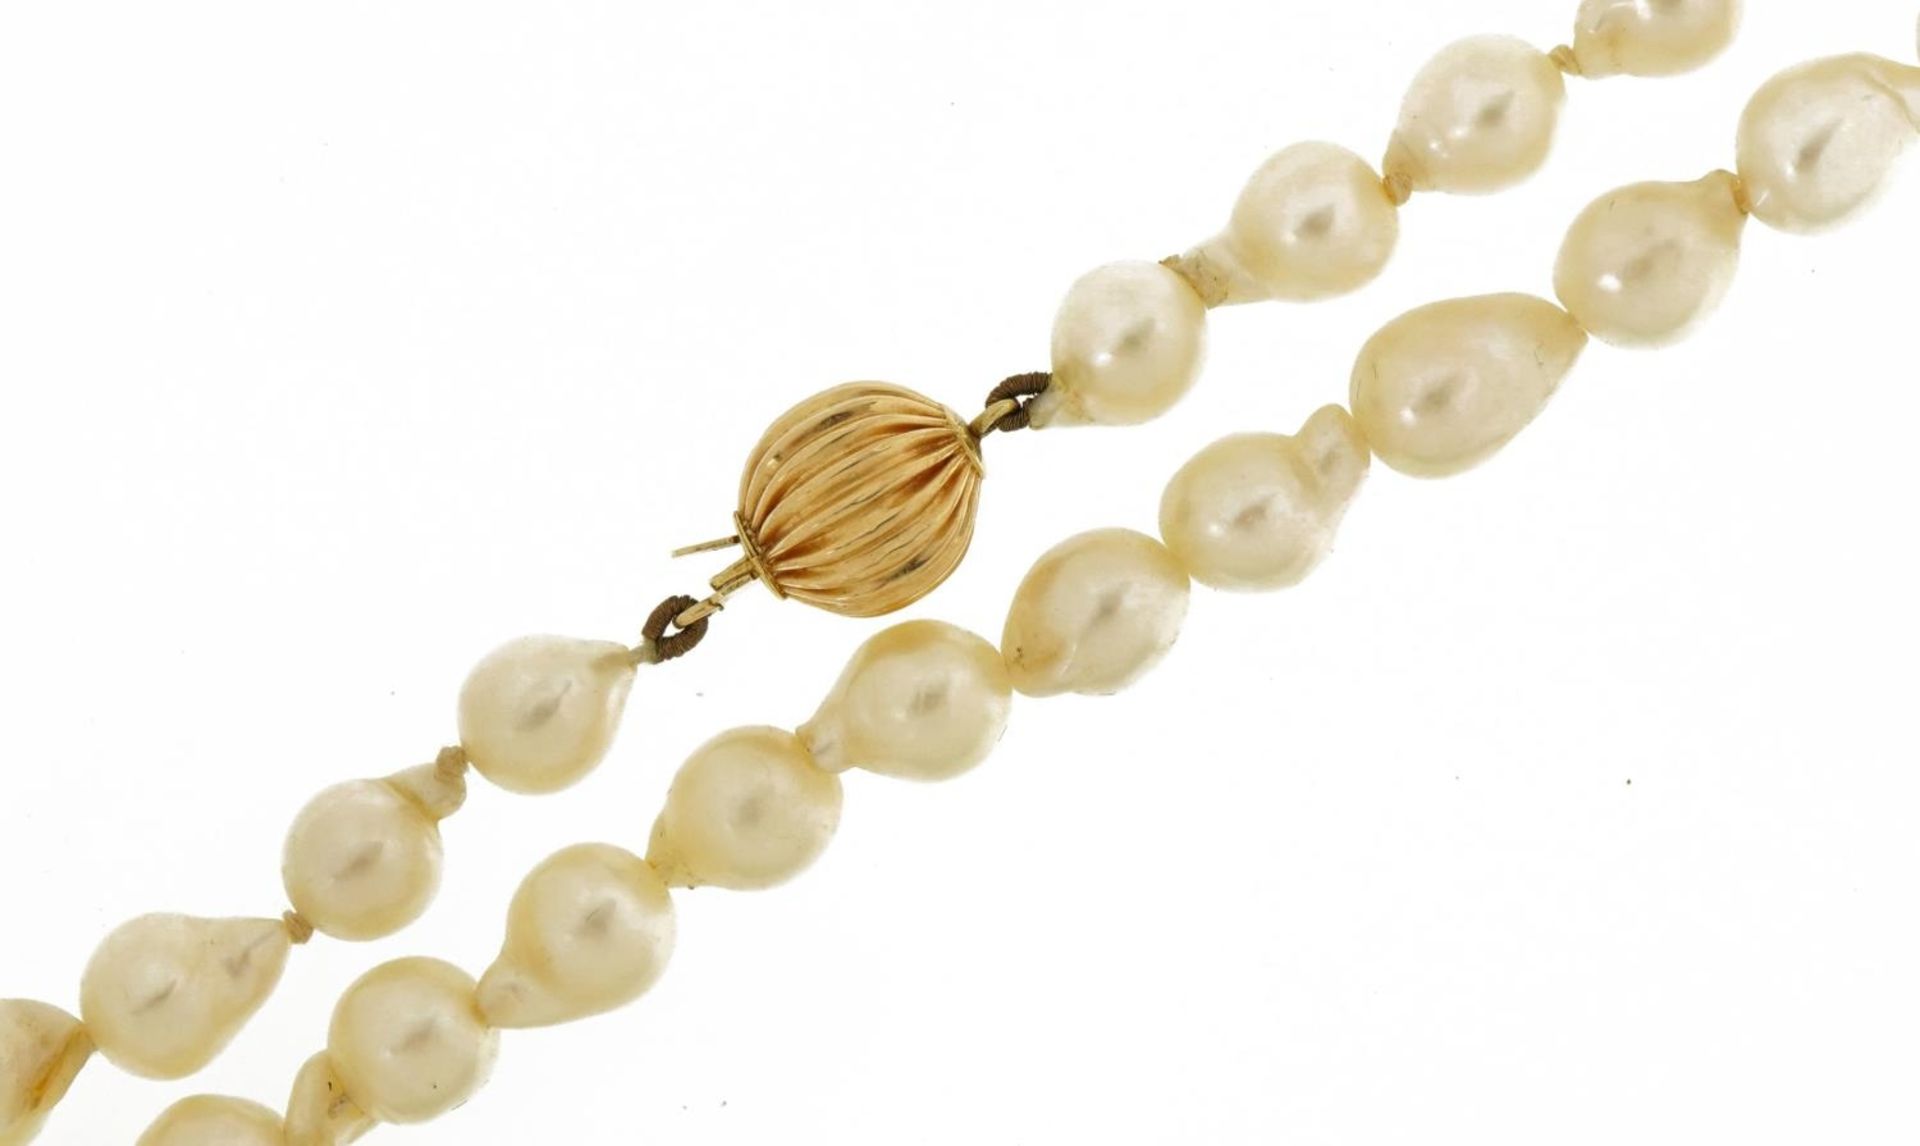 Freshwater pearl single strand necklace with 14k gold ball clasp housed in a Mackintosh Inspired